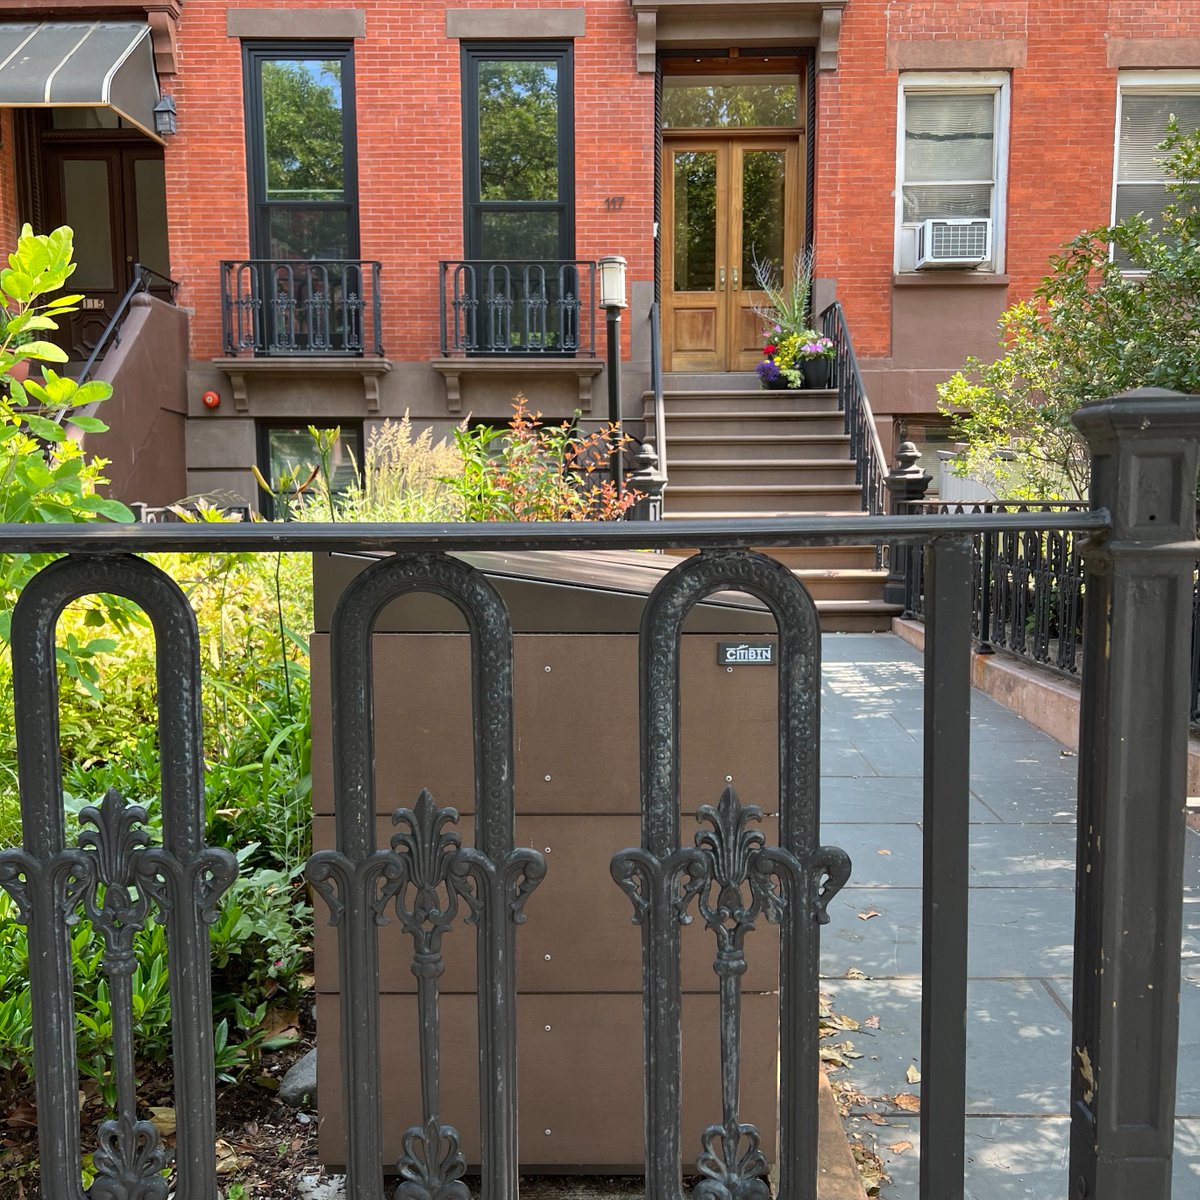 This #CITIBIN is several years old, but still looks as good as new!
Our powder-coated aluminum shell and recycled bamboo composite make CITIBINs durable and easy to maintain. citibin.com
#TrashNeverLookedSoStylish #smallbusiness #nyc #womenownedbusines #ratproof